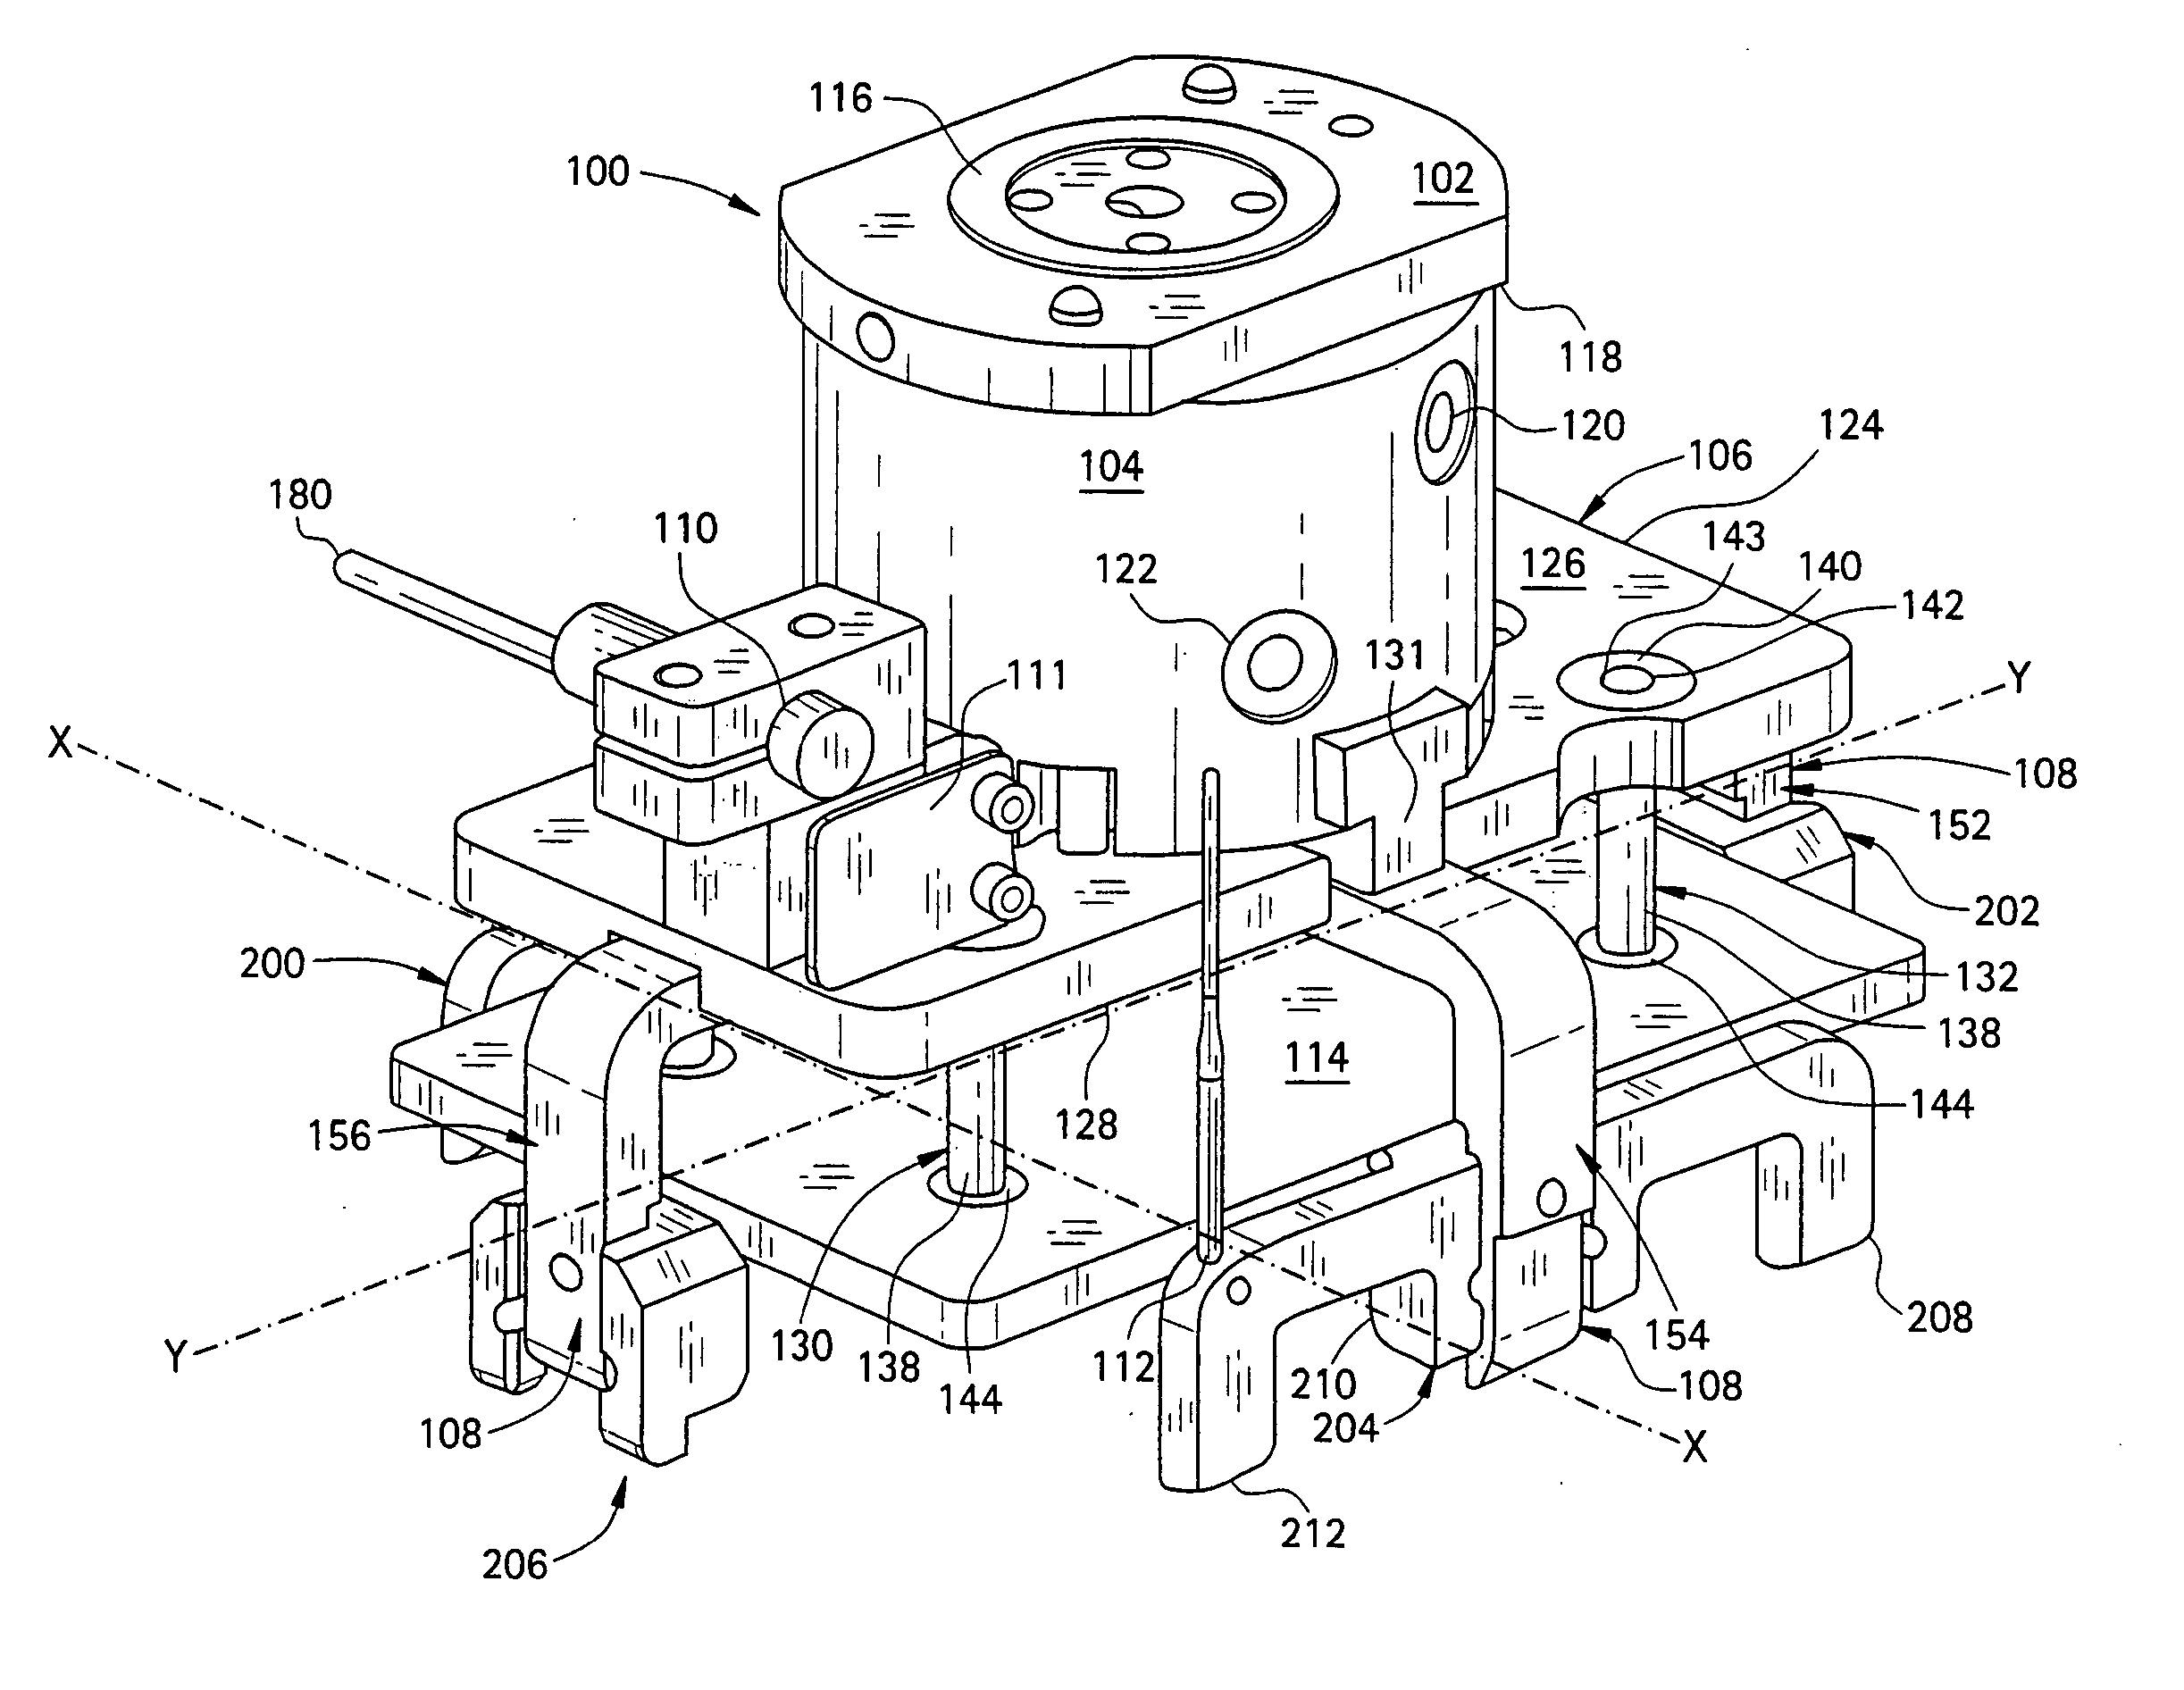 Robotic gripper for transporting multiple object types